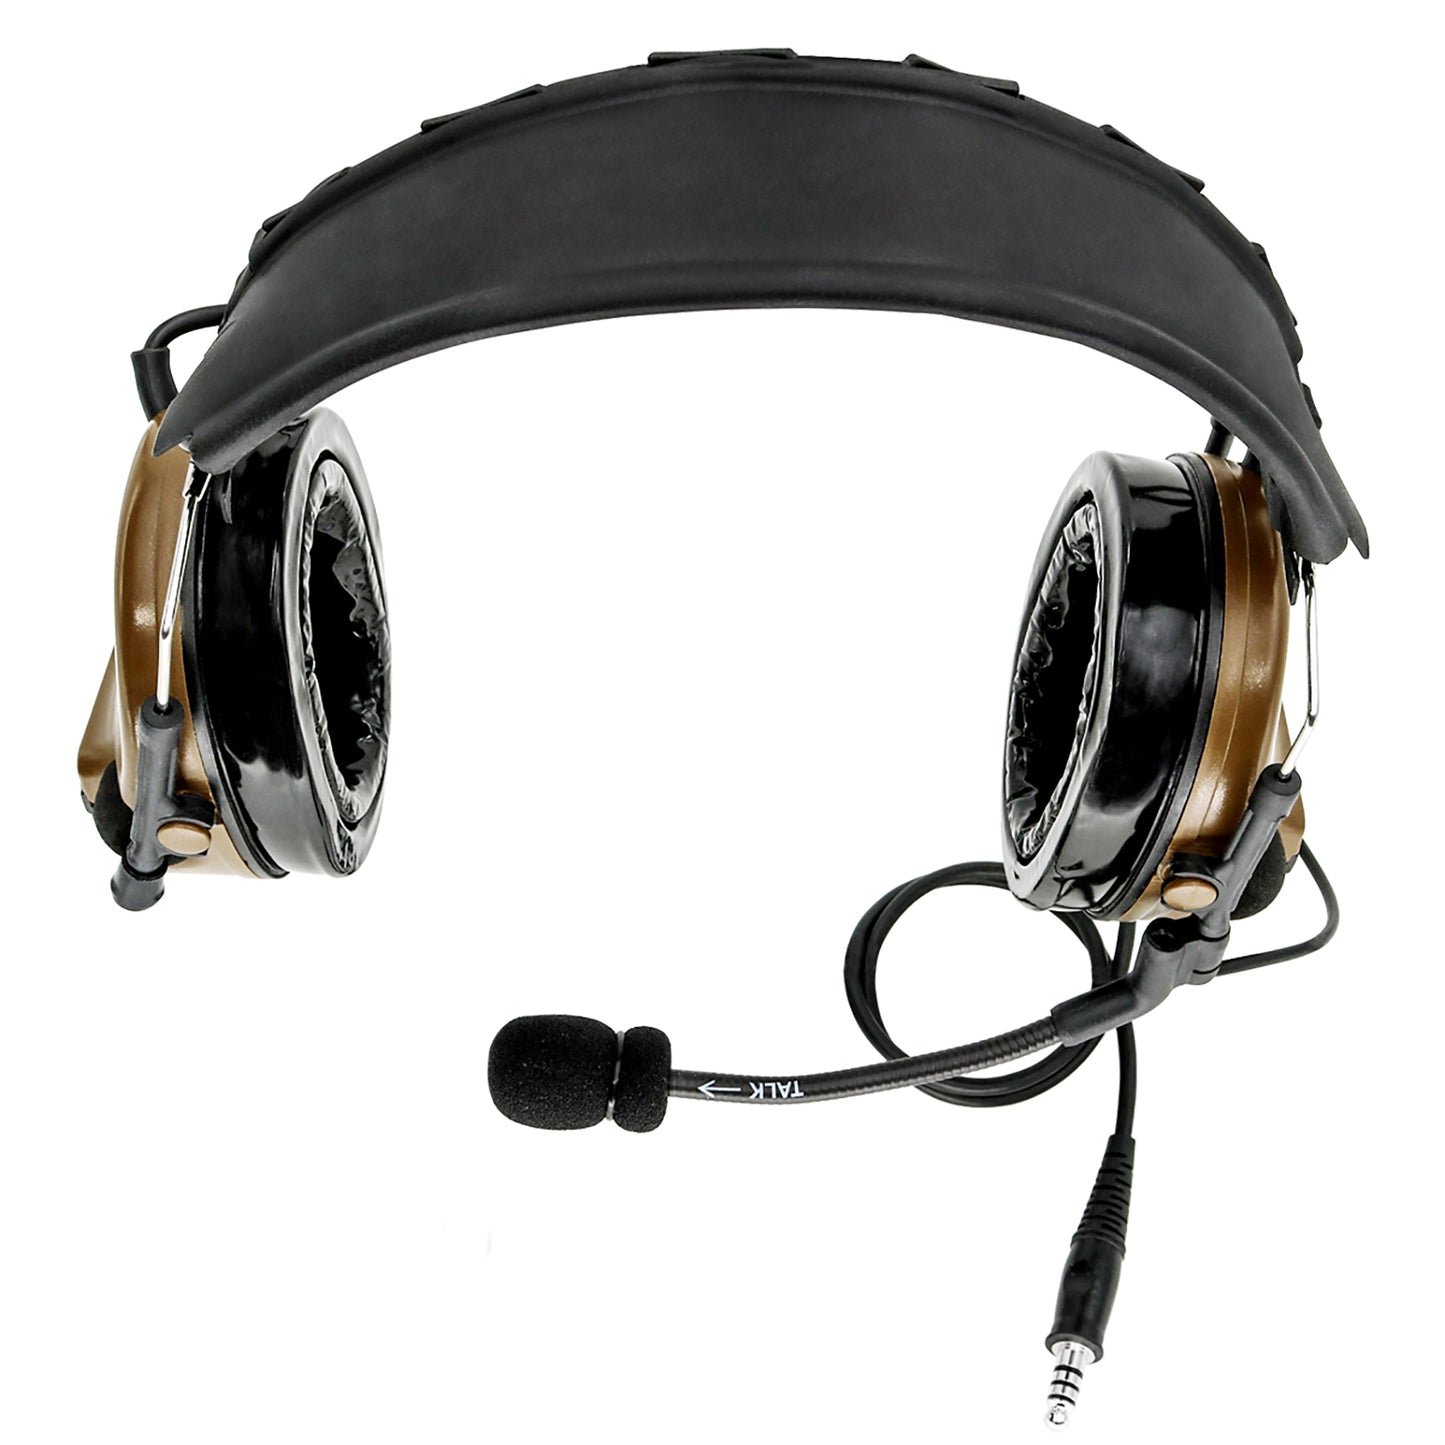 TAC-SKY C3 Tactical Headset Noise-canceling airsoft protective gear with microphone and kenwoodPTT